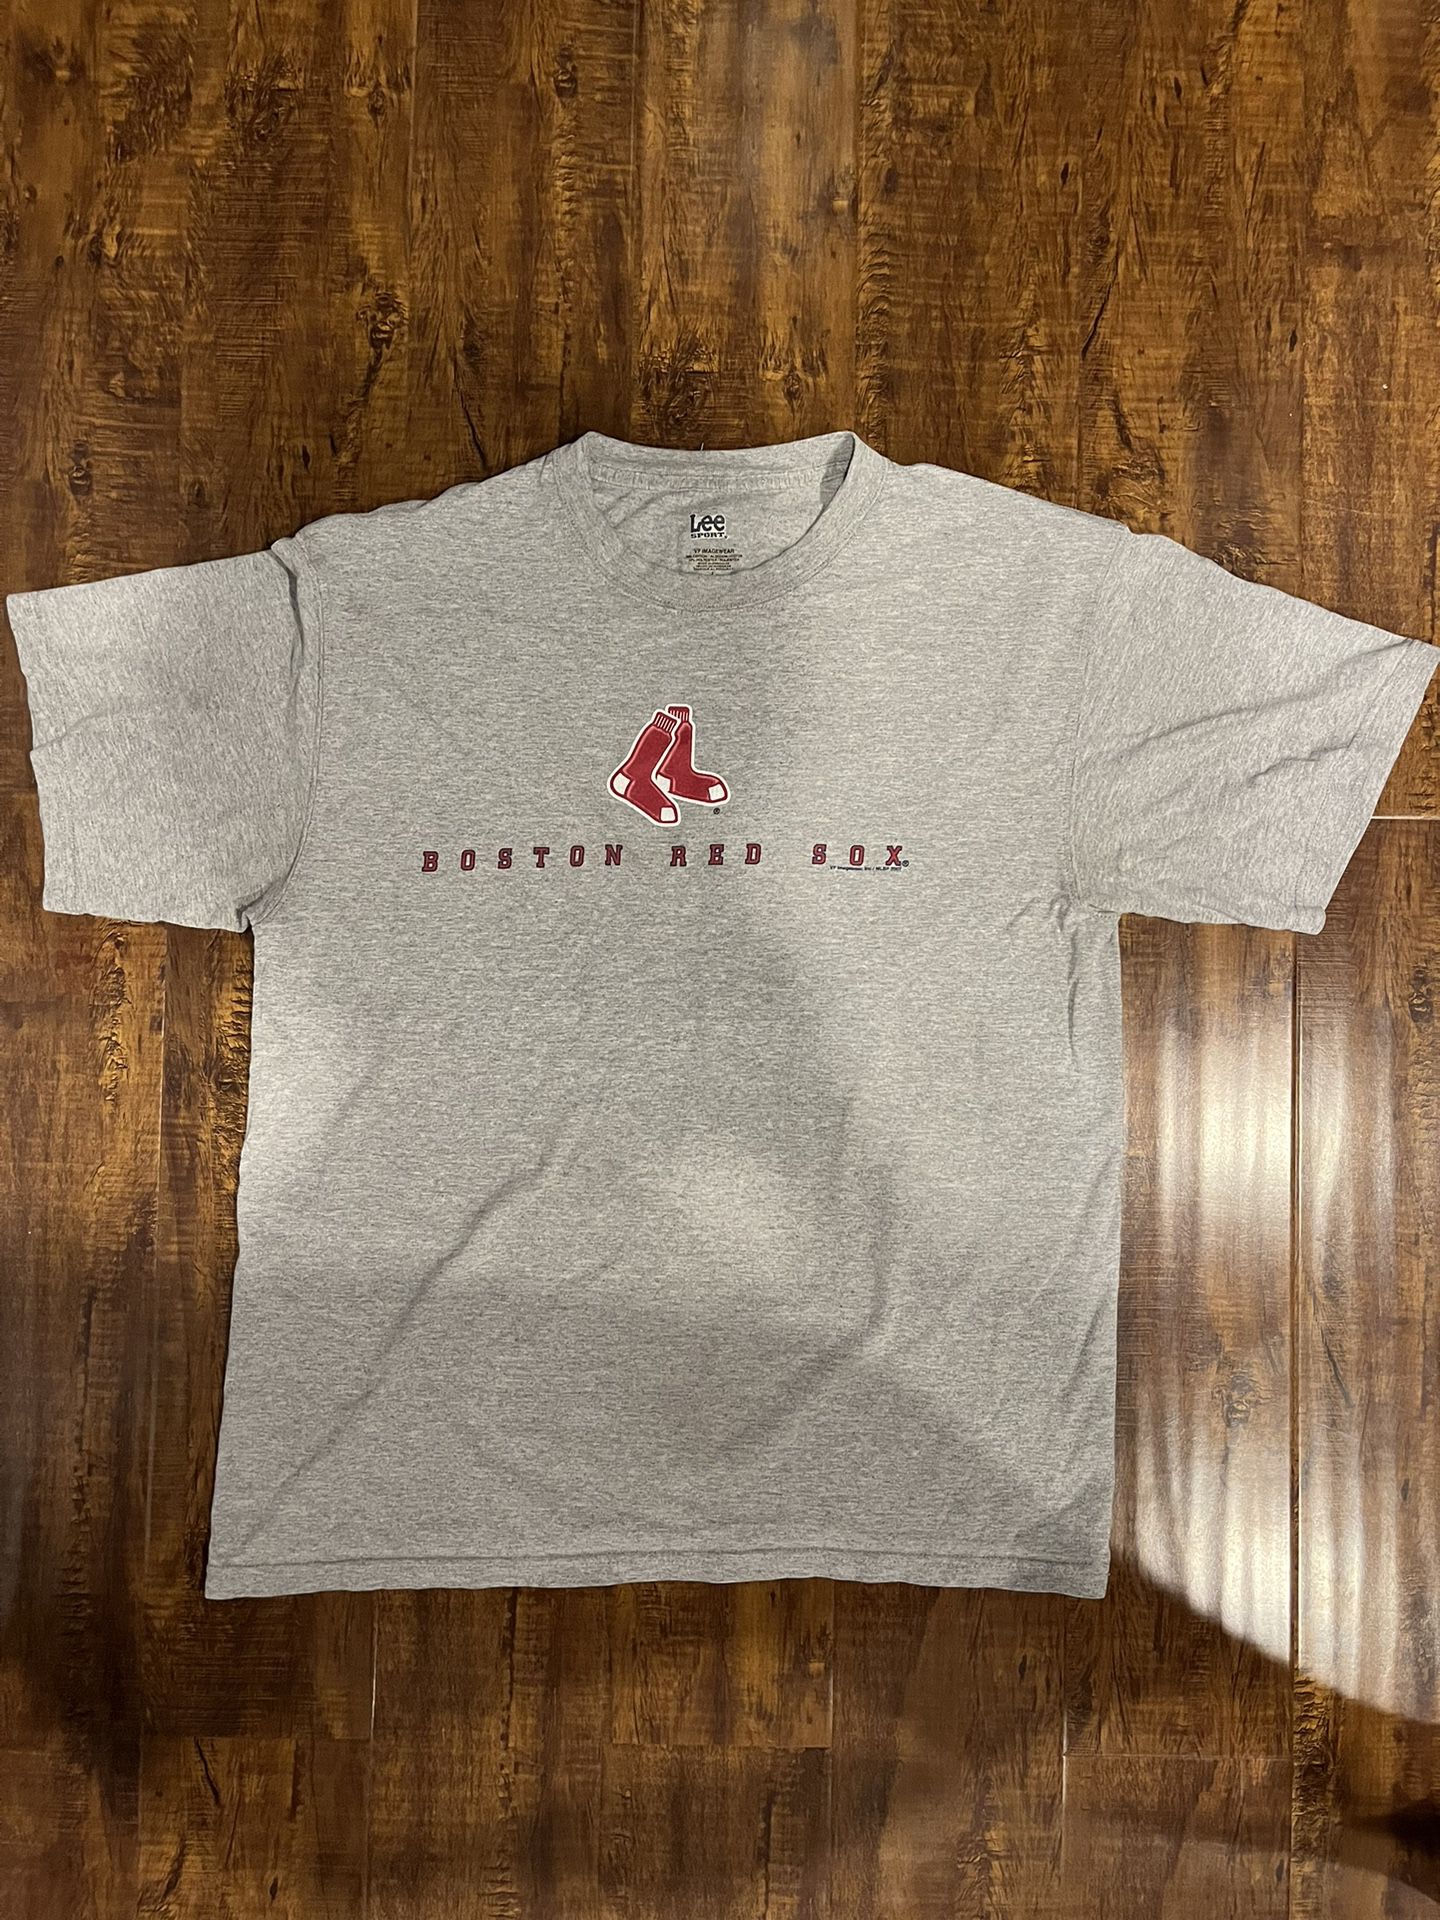 Vintage 2007 Boston Red Sox Graphic Tee